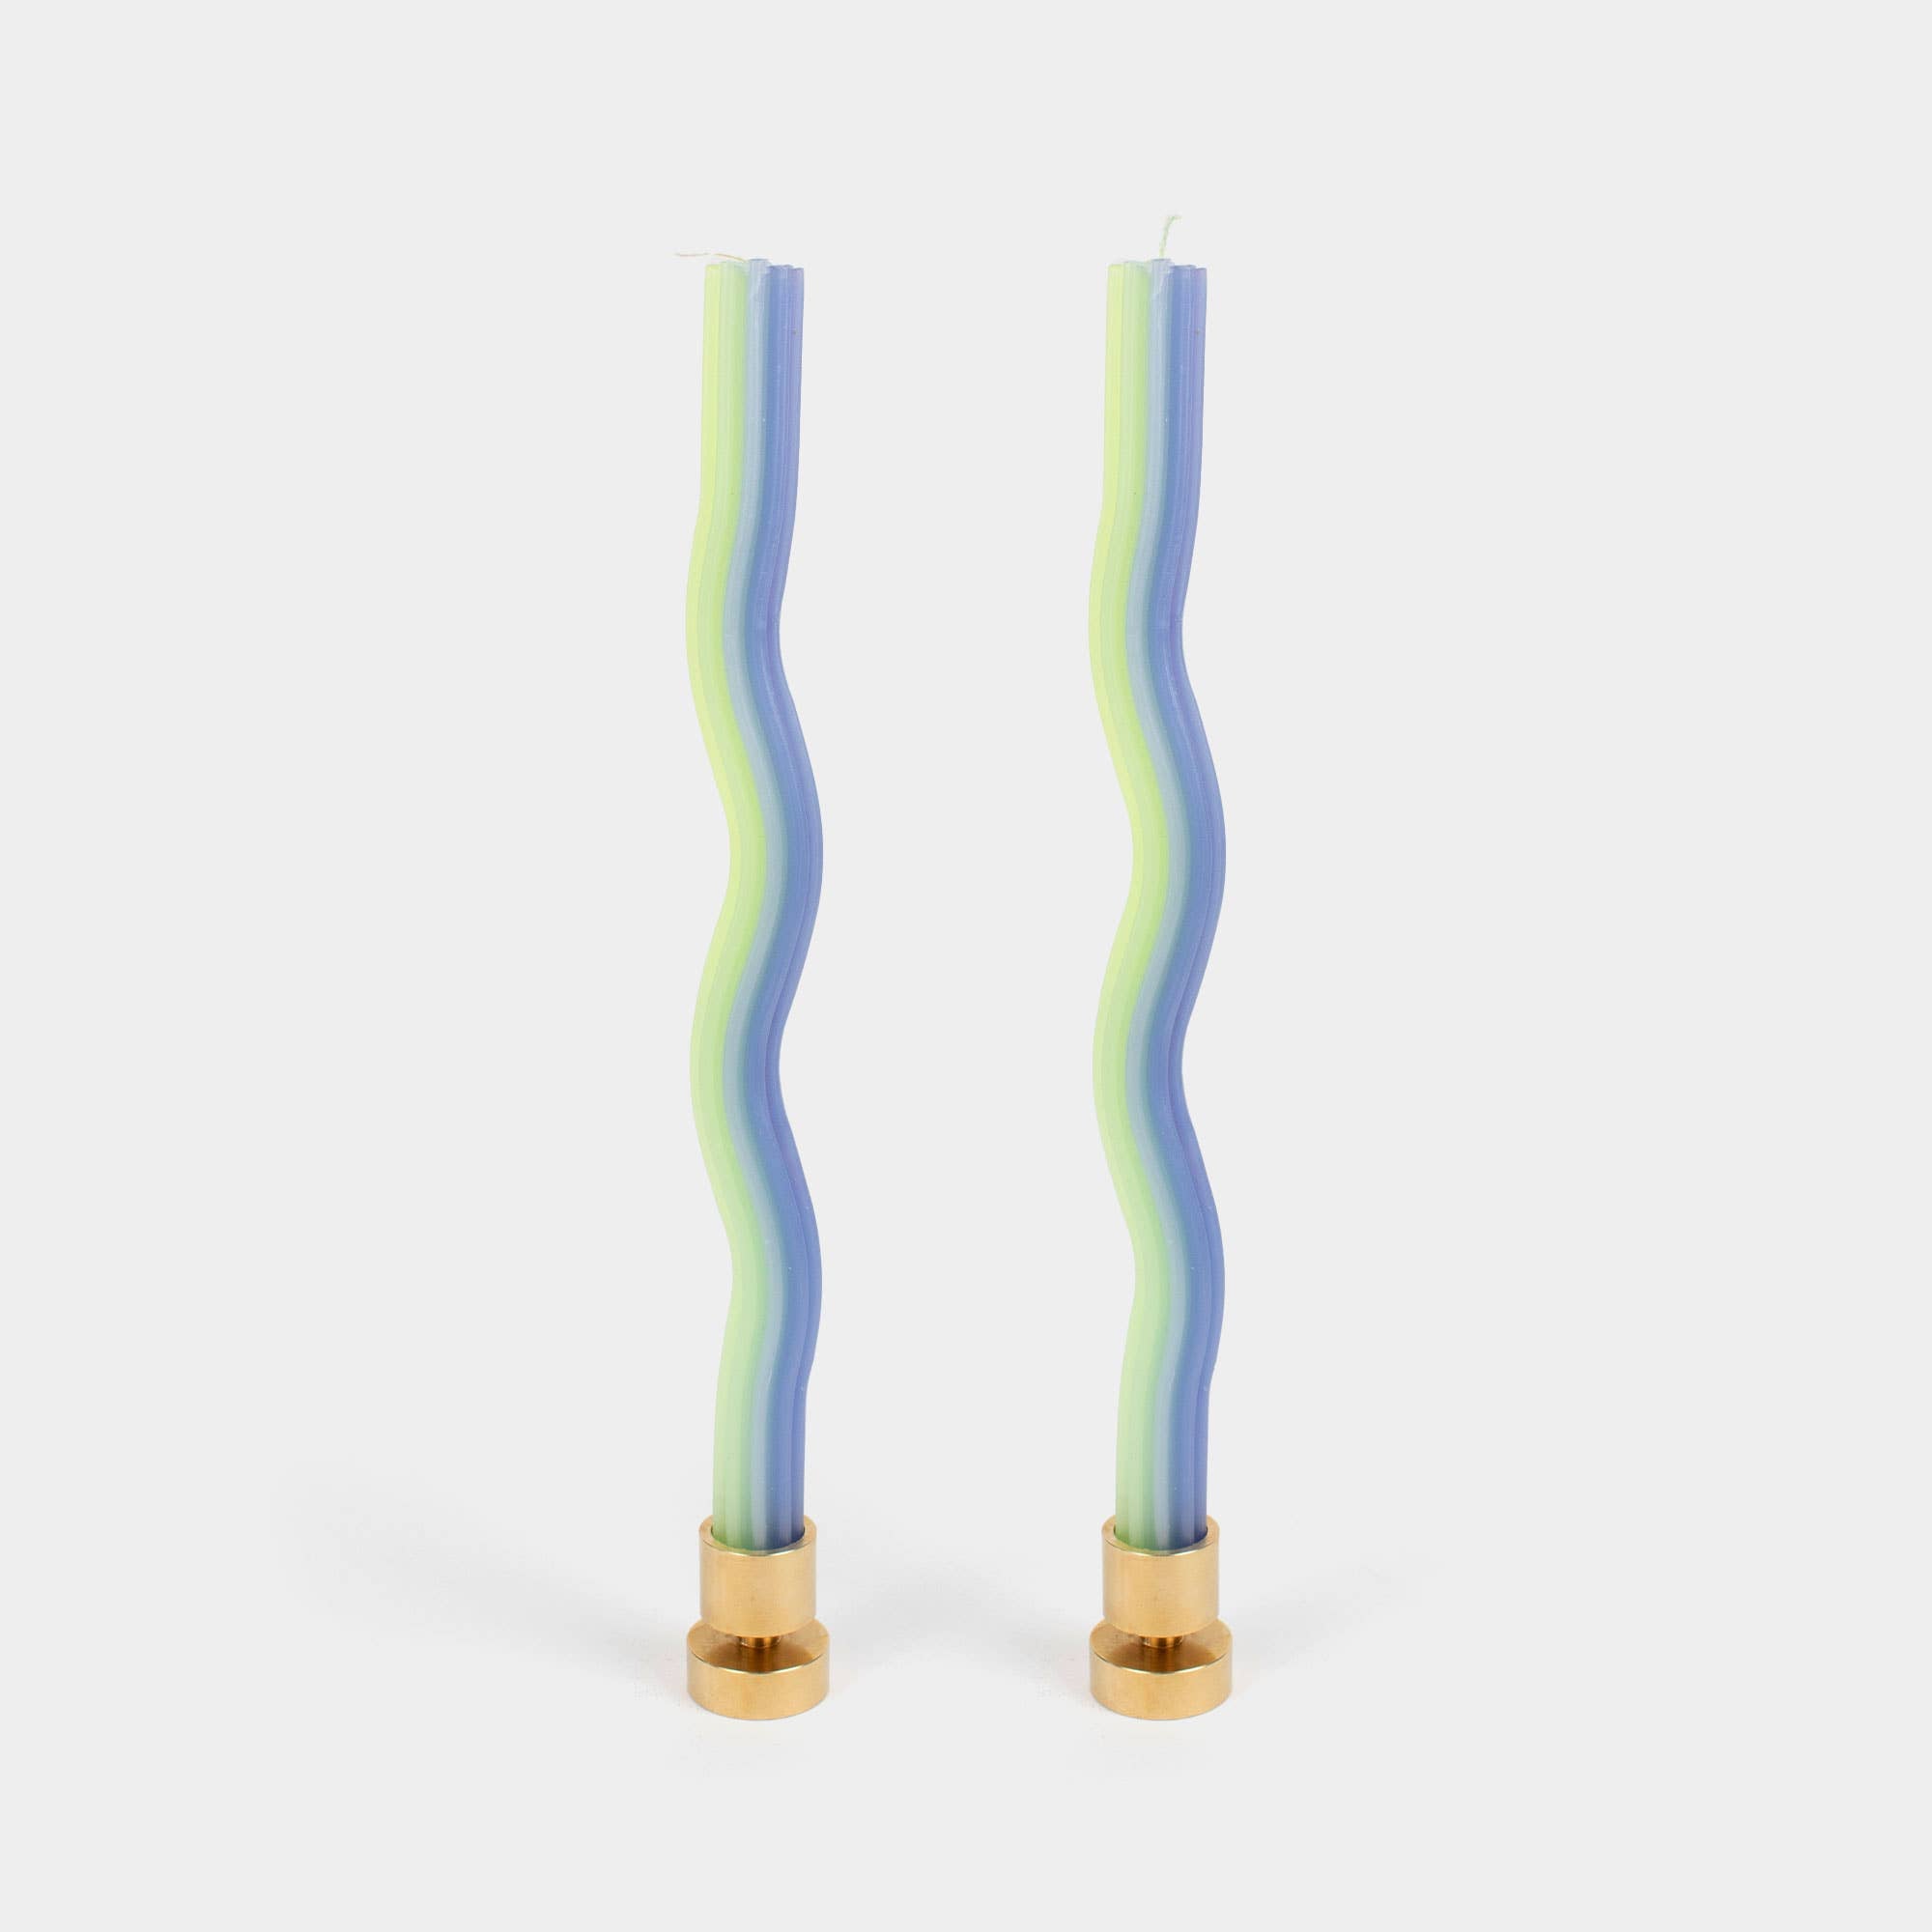 Wiggle Candles by Lex Pott - Lavender & Green (2 pack)